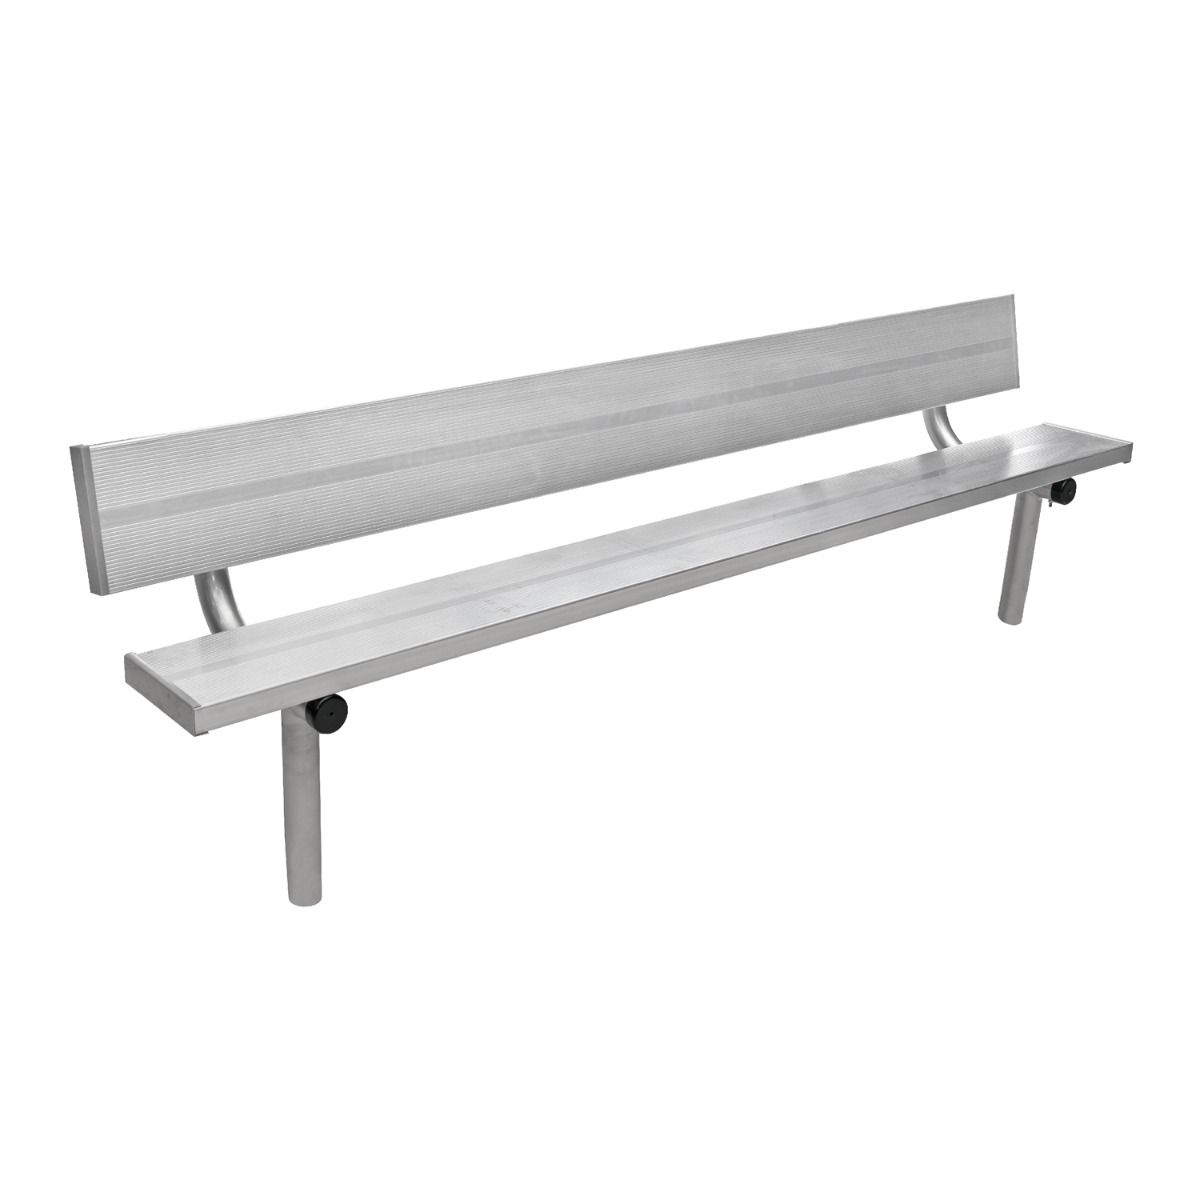 STATIONARY ALUMINUM BENCH WITH BACK